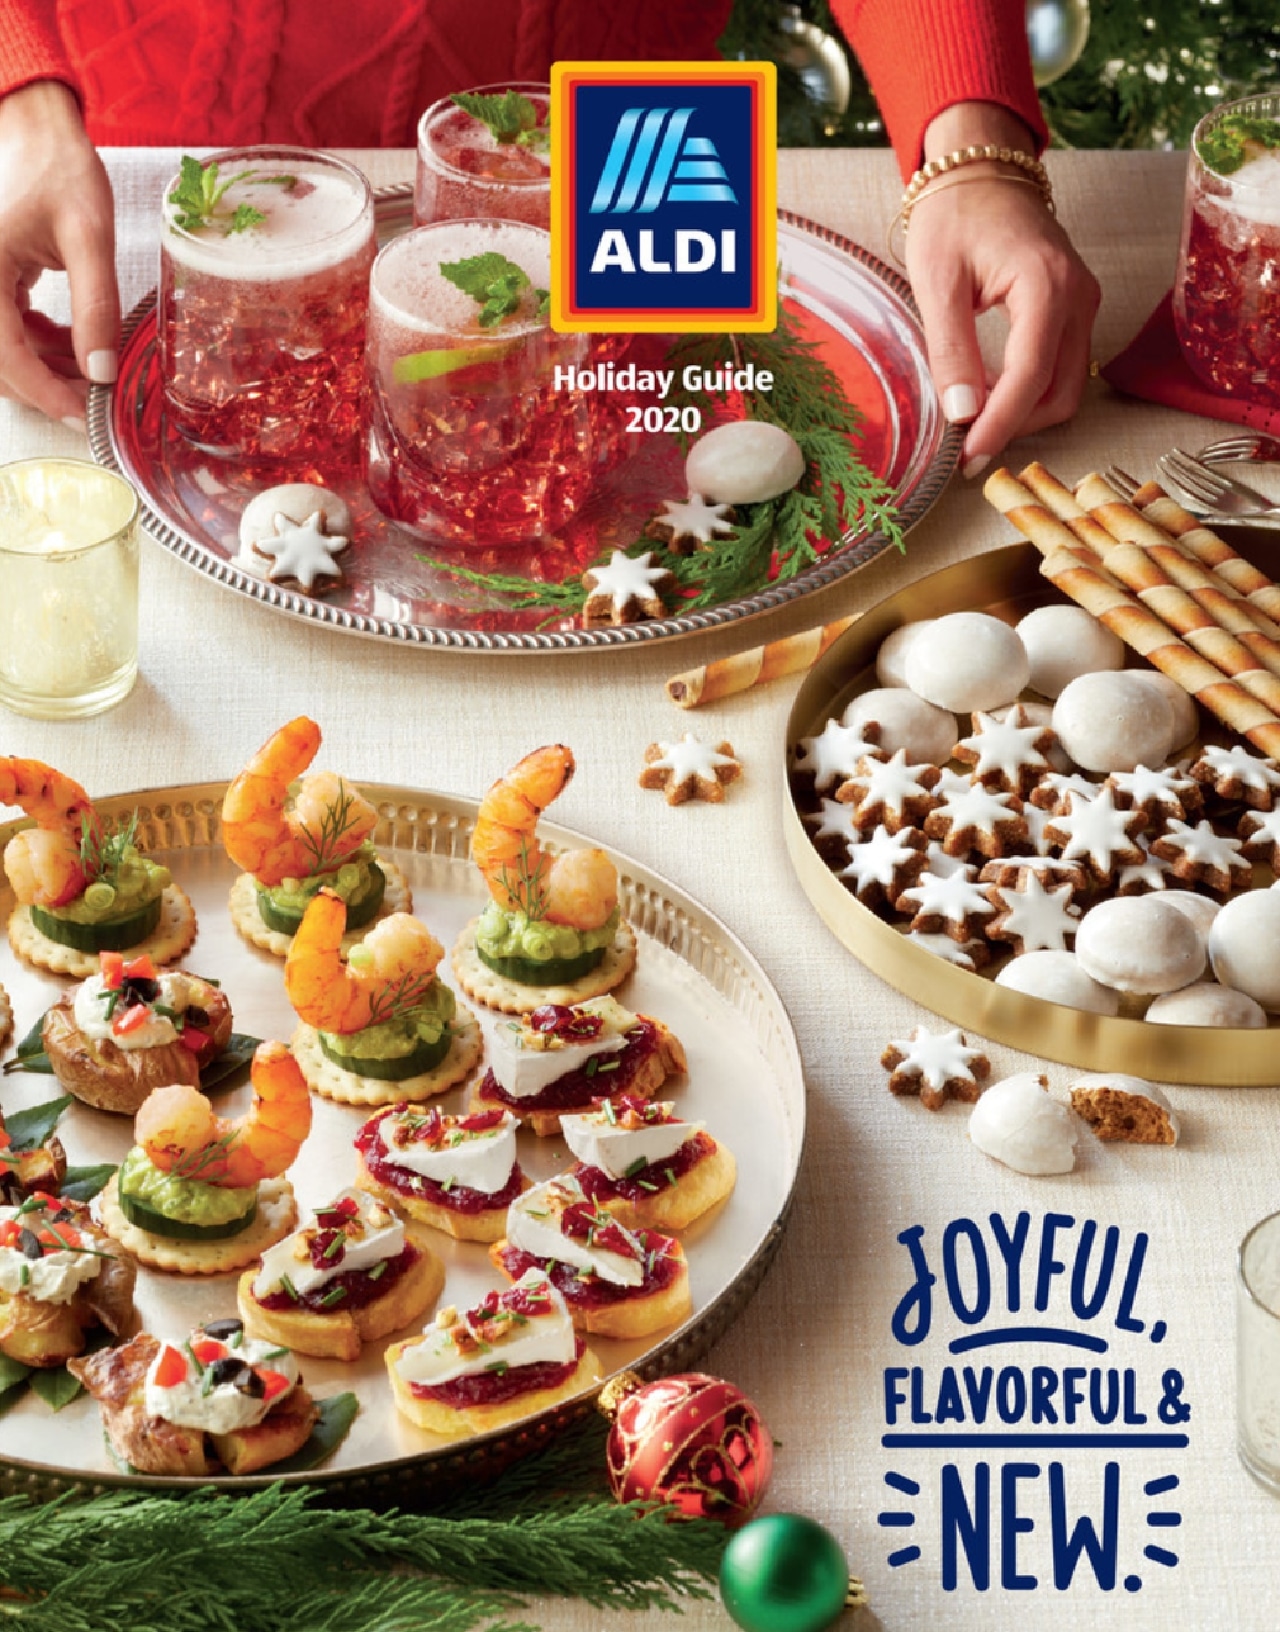 Highlights From the 2020 Aldi Holiday Guide ALDI REVIEWER